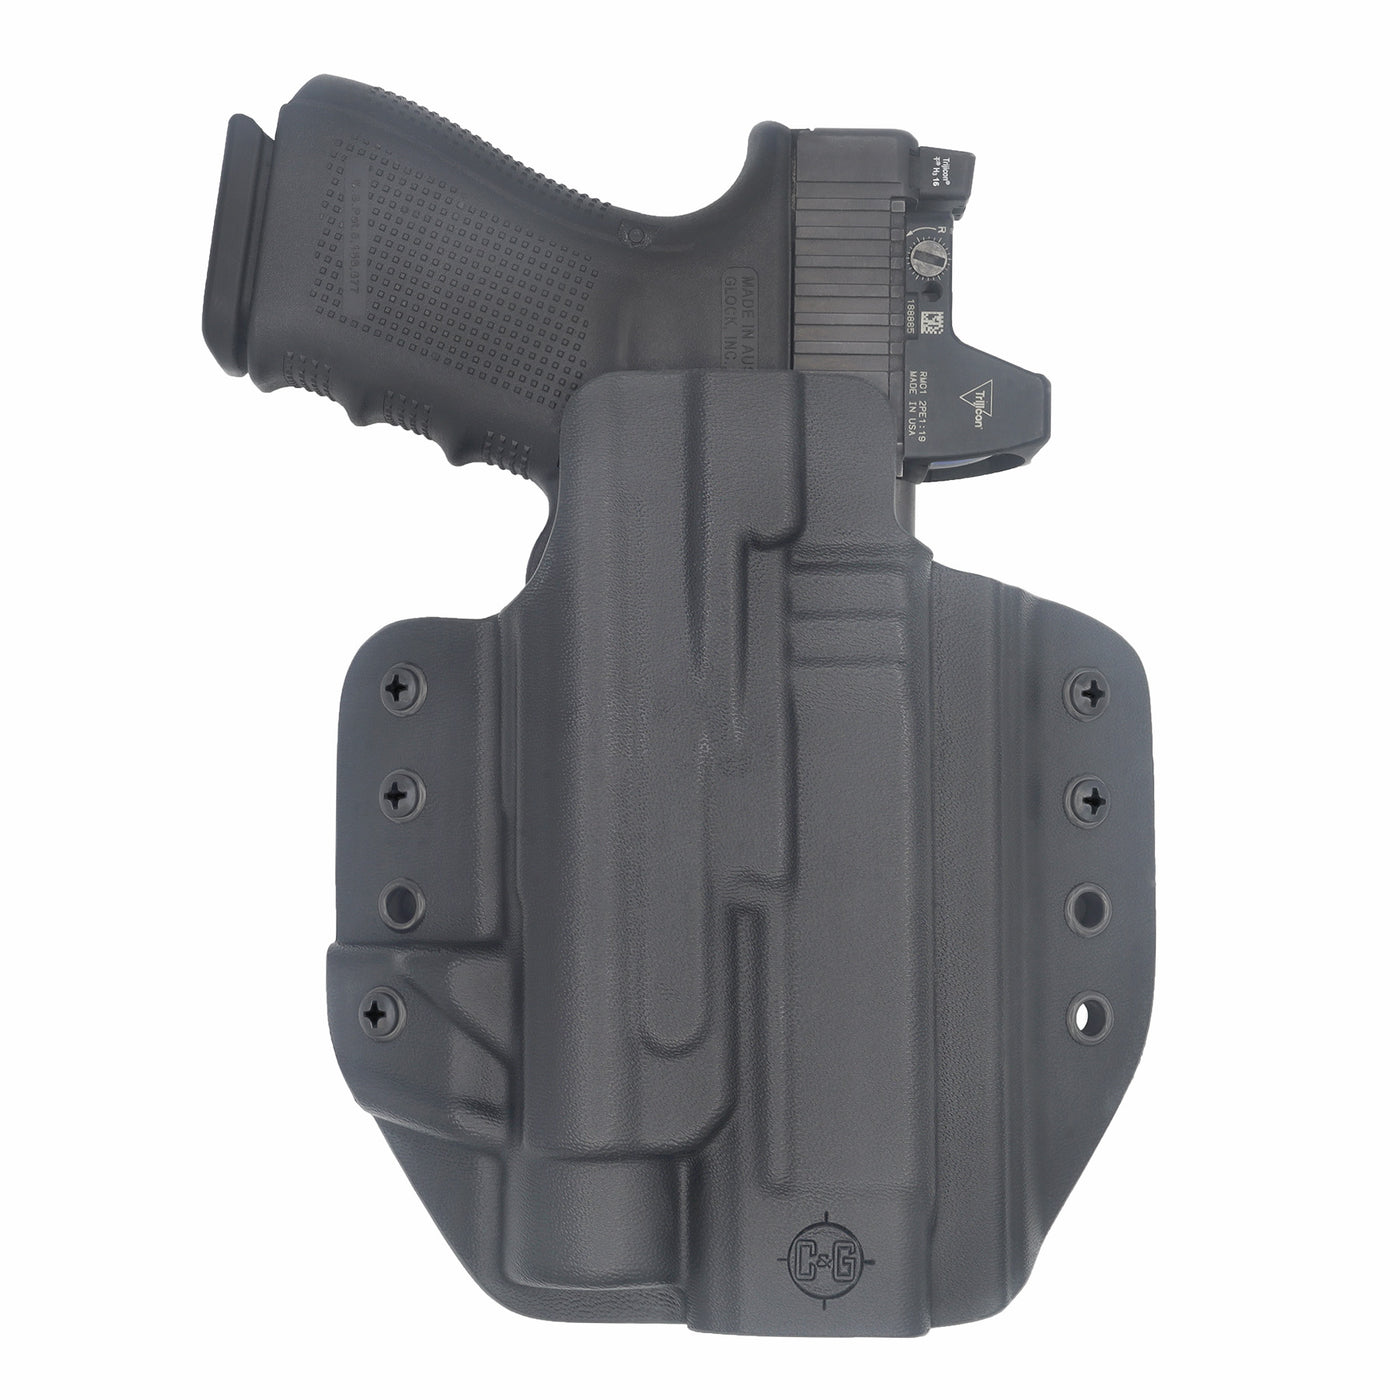 C&G Holsters custom OWB Tactical Glock 20/21 Streamlight TLR1 in holstered position